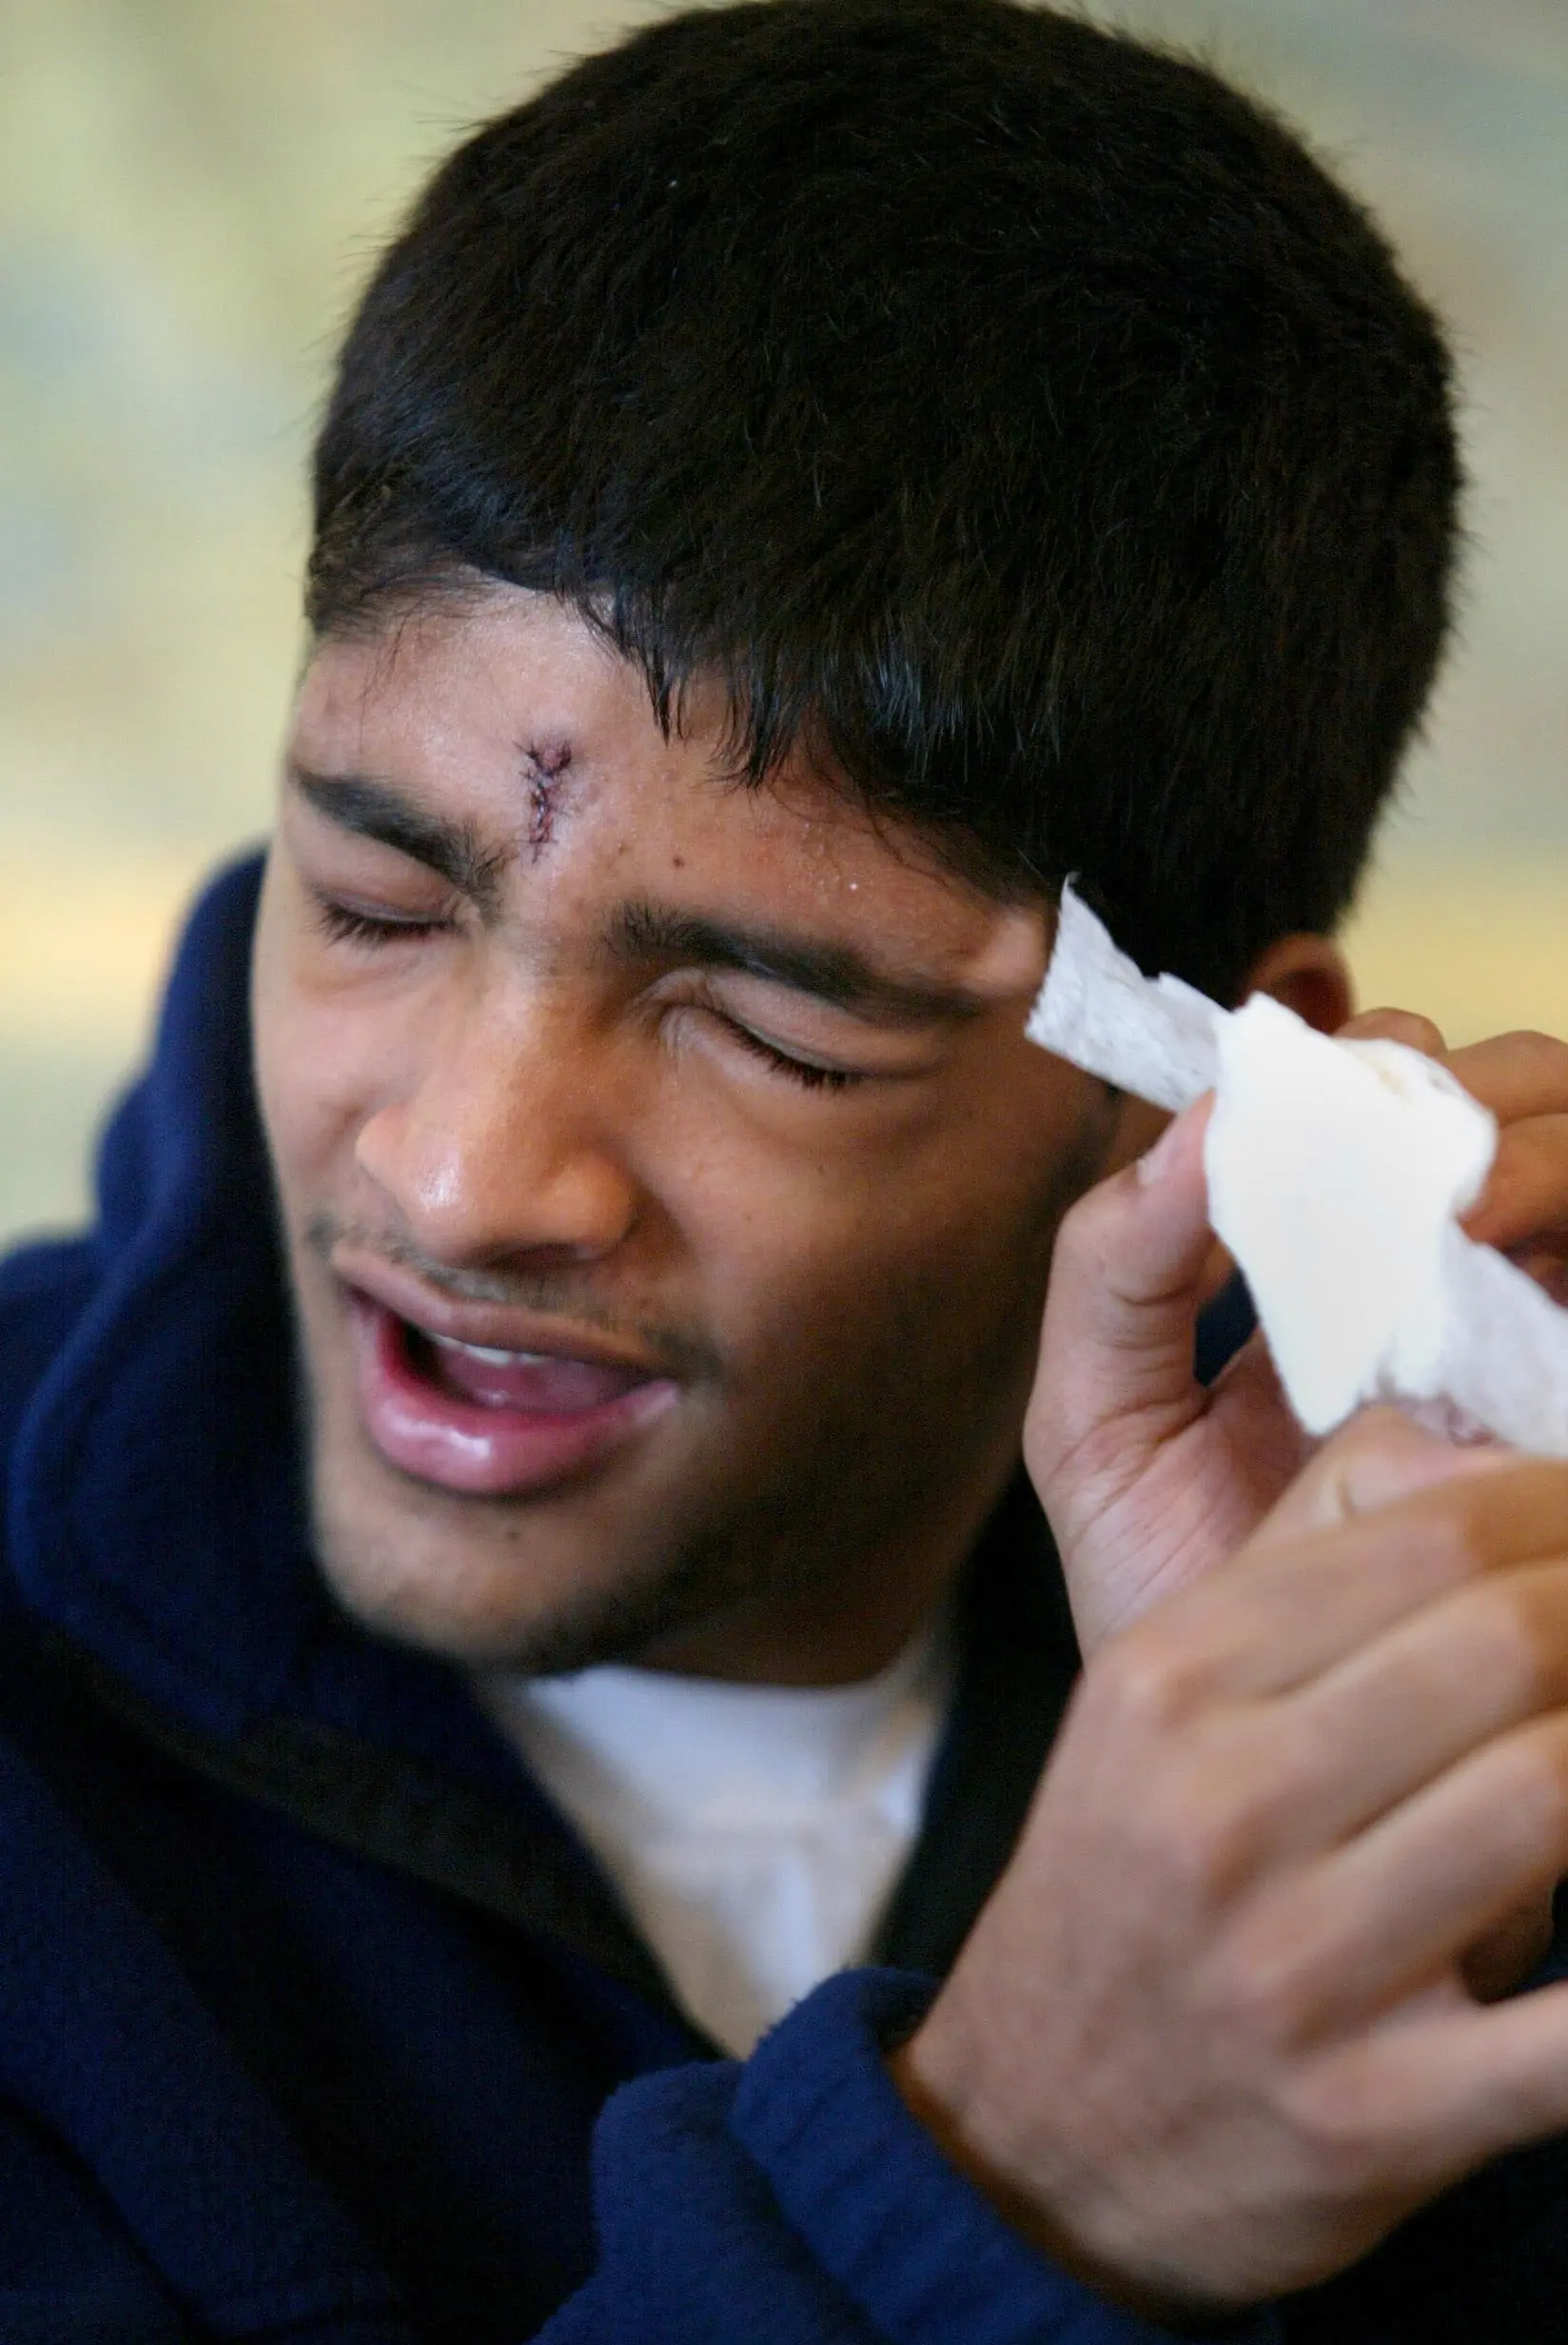 Kapila Bhamidipati removes a bandage to show the pepper ball wound he suffered outside of Fenway Park.